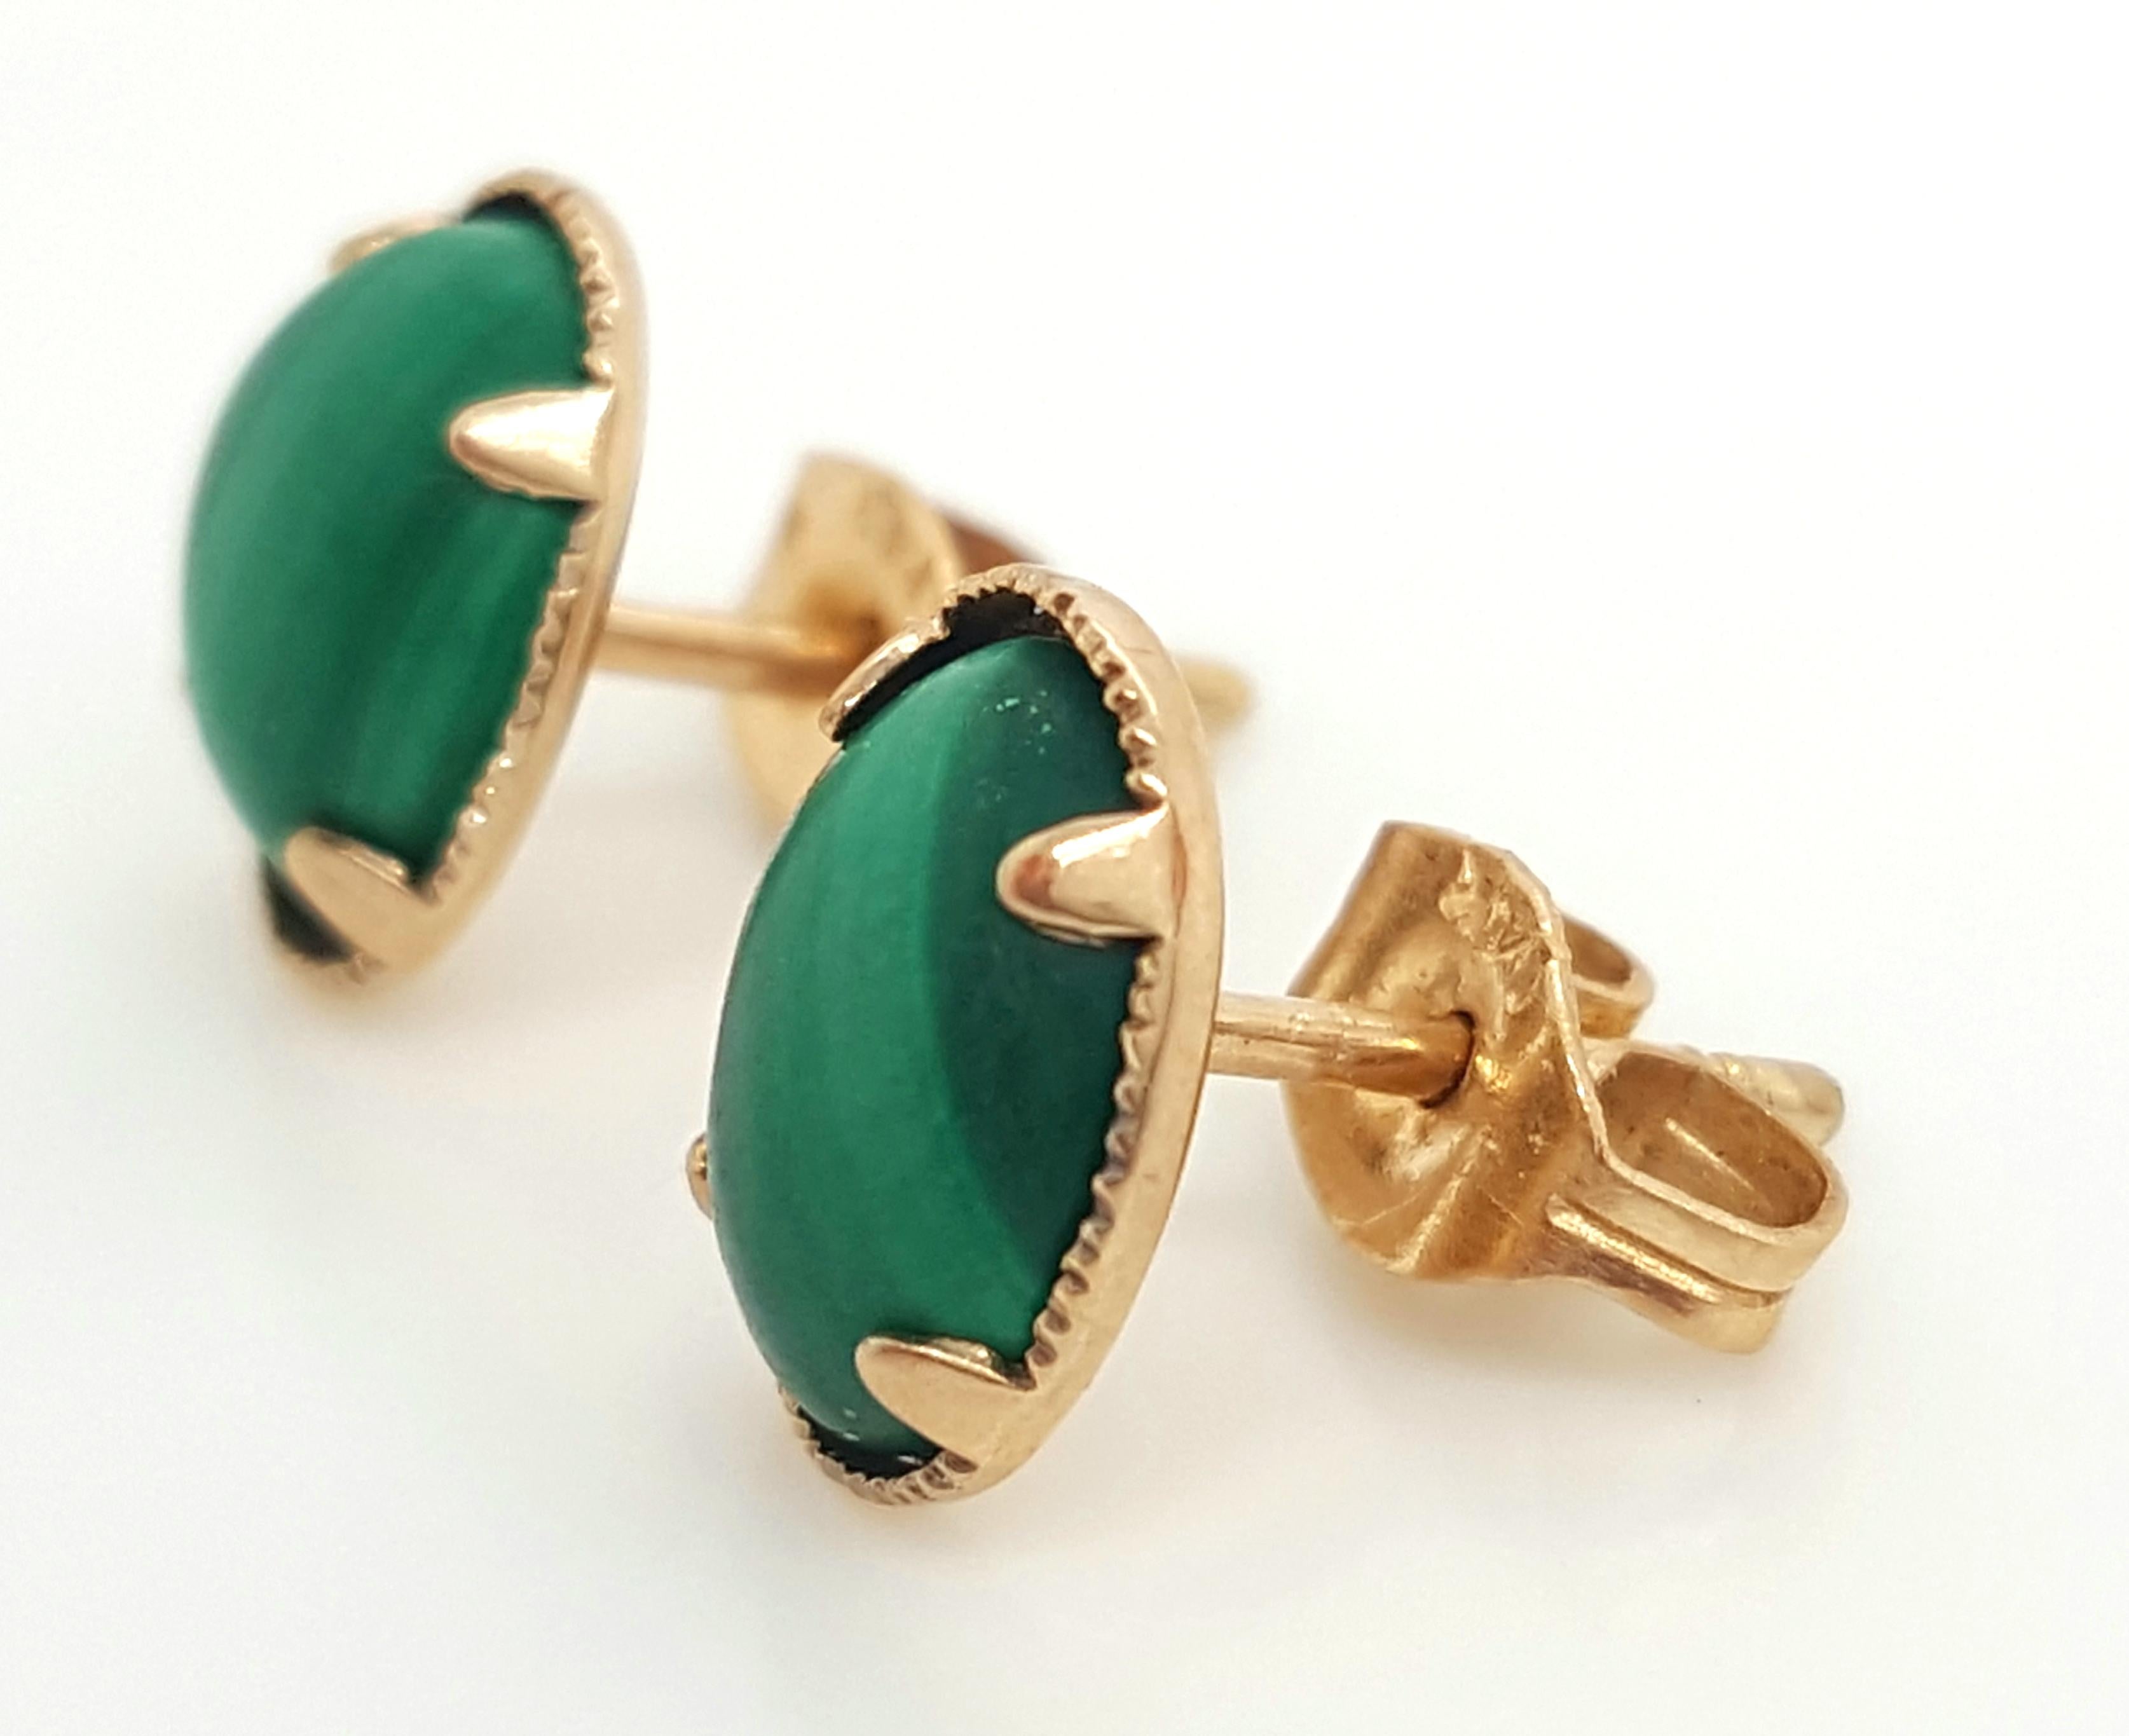 10 Karat Yellow Gold Oval Cabochon Malachite Stud Earrings.  The earrings feature a pair of oval shaped cabochon malachite. The malachite are each set into a 14 karat yellow gold four prong setting, completed by posts and friction backs.  Earrings